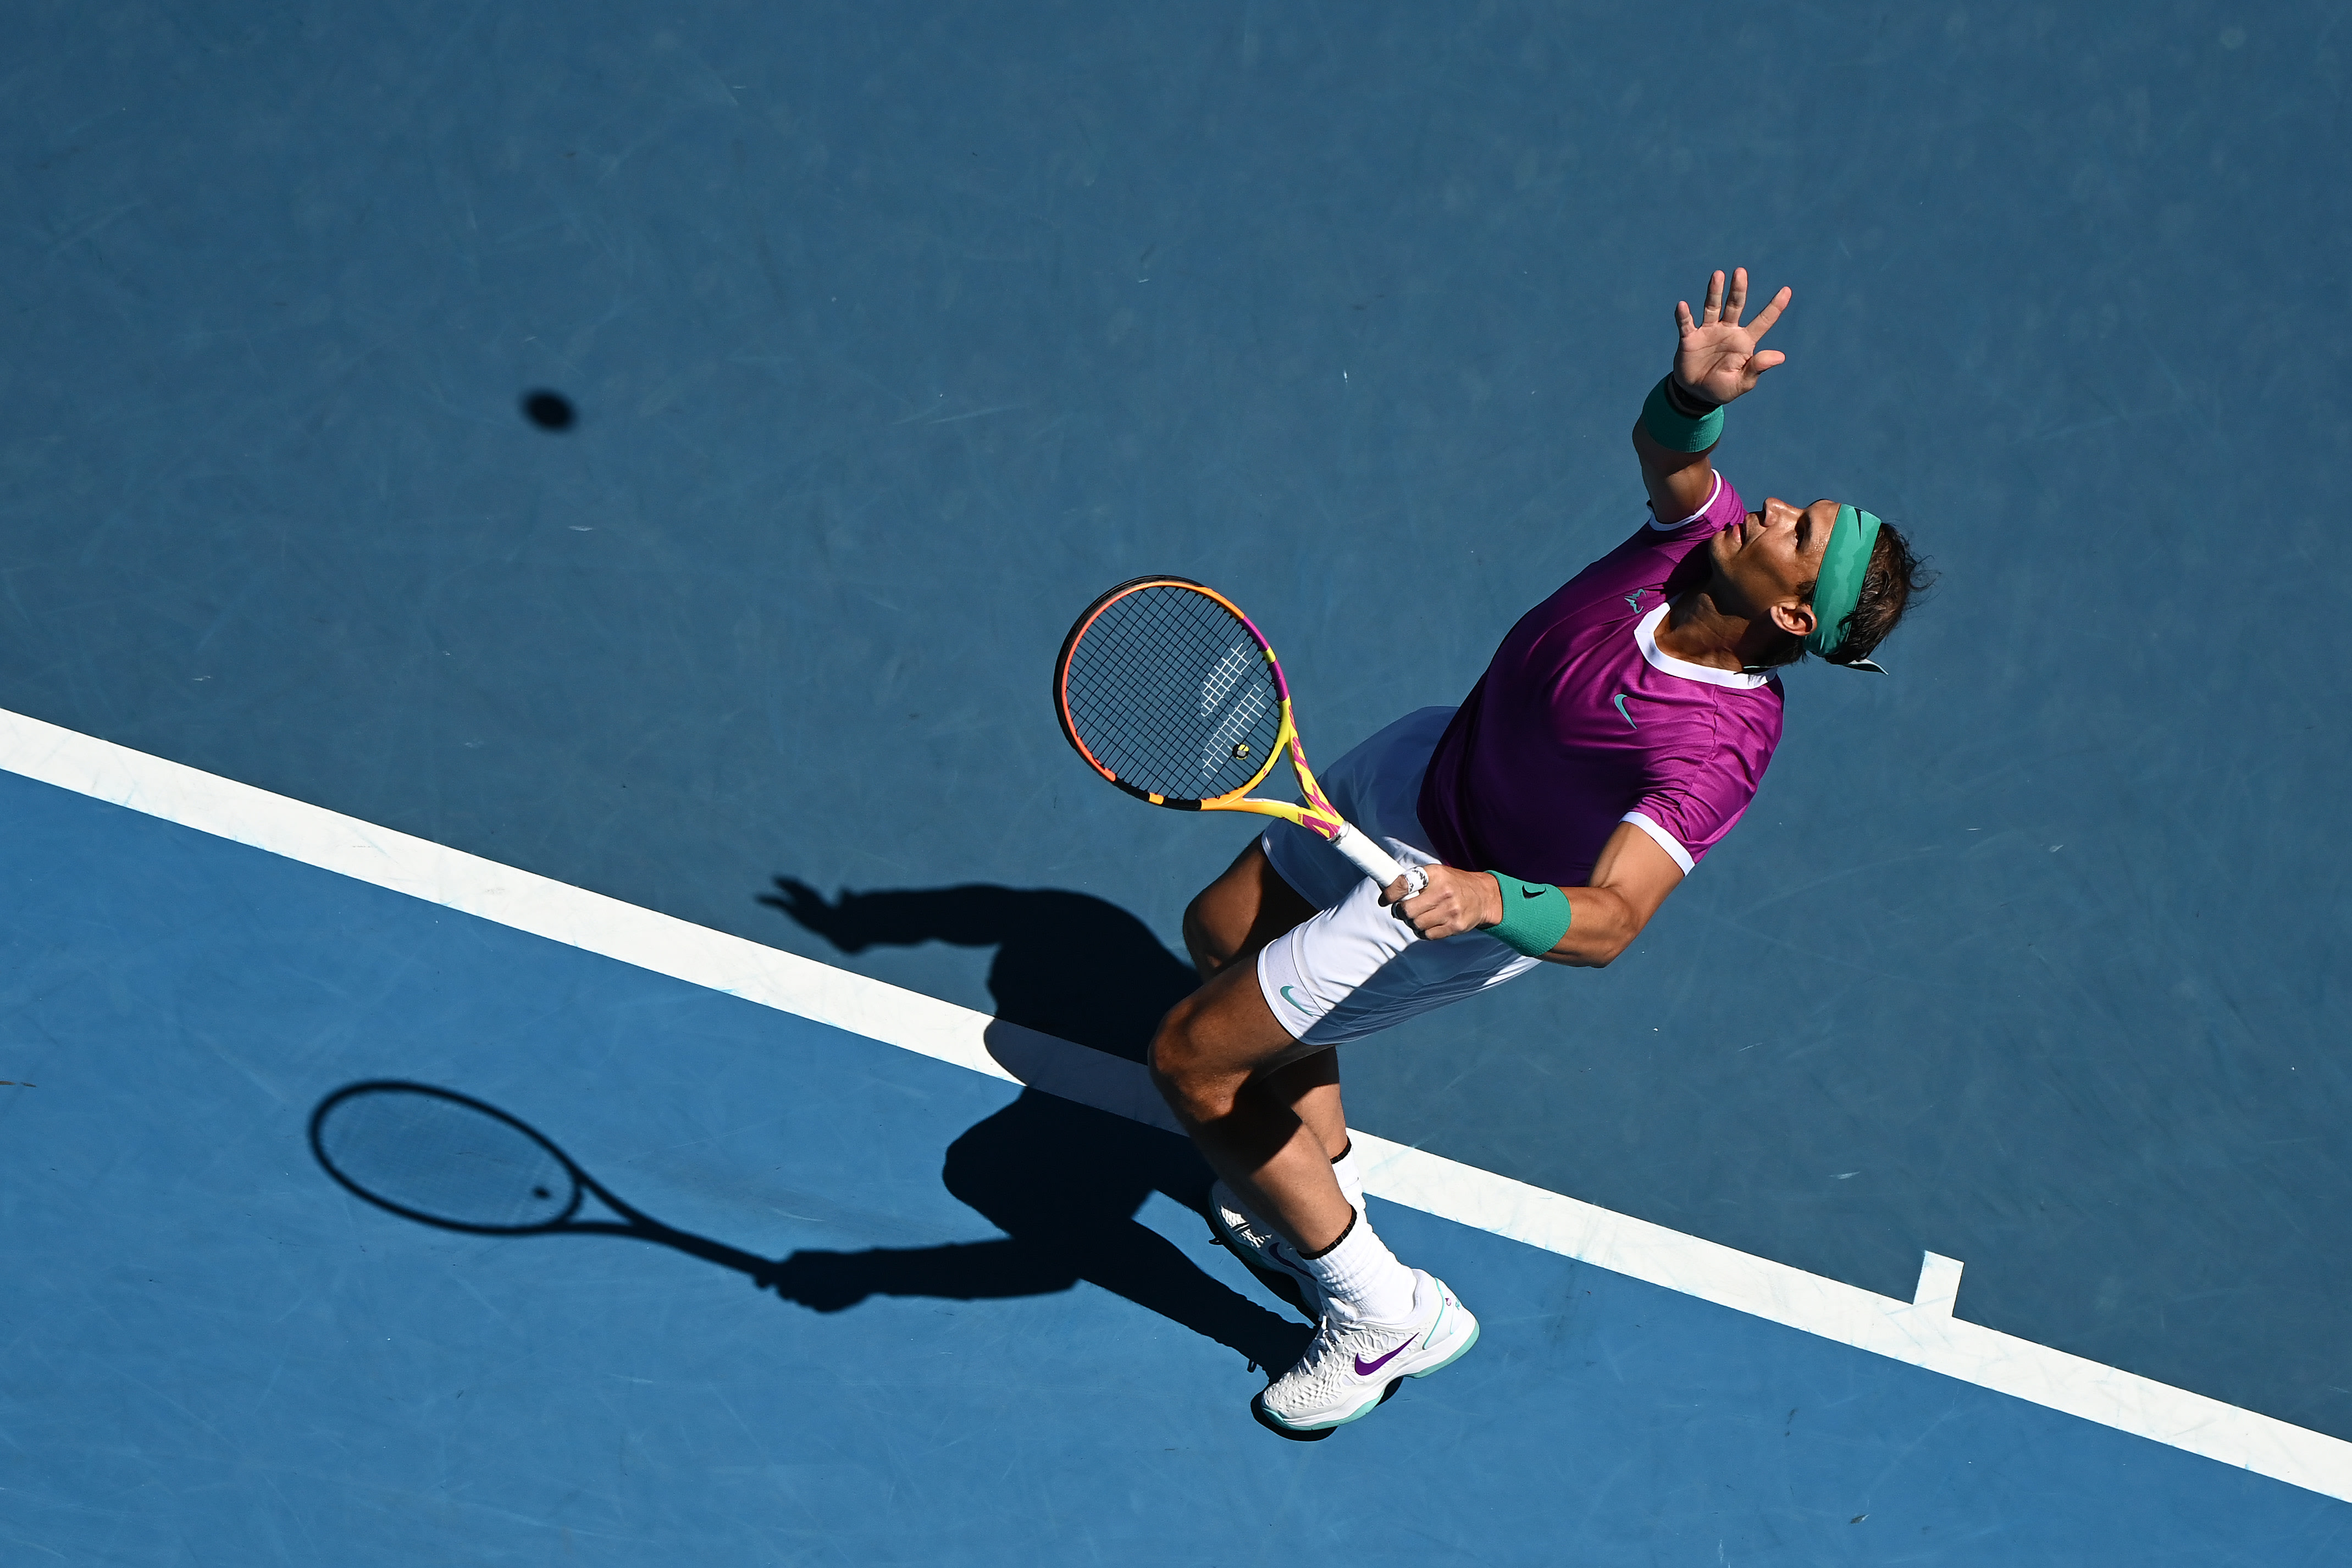 Rafael Nadal eases into uncertain Australian Open with emphatic opening victory